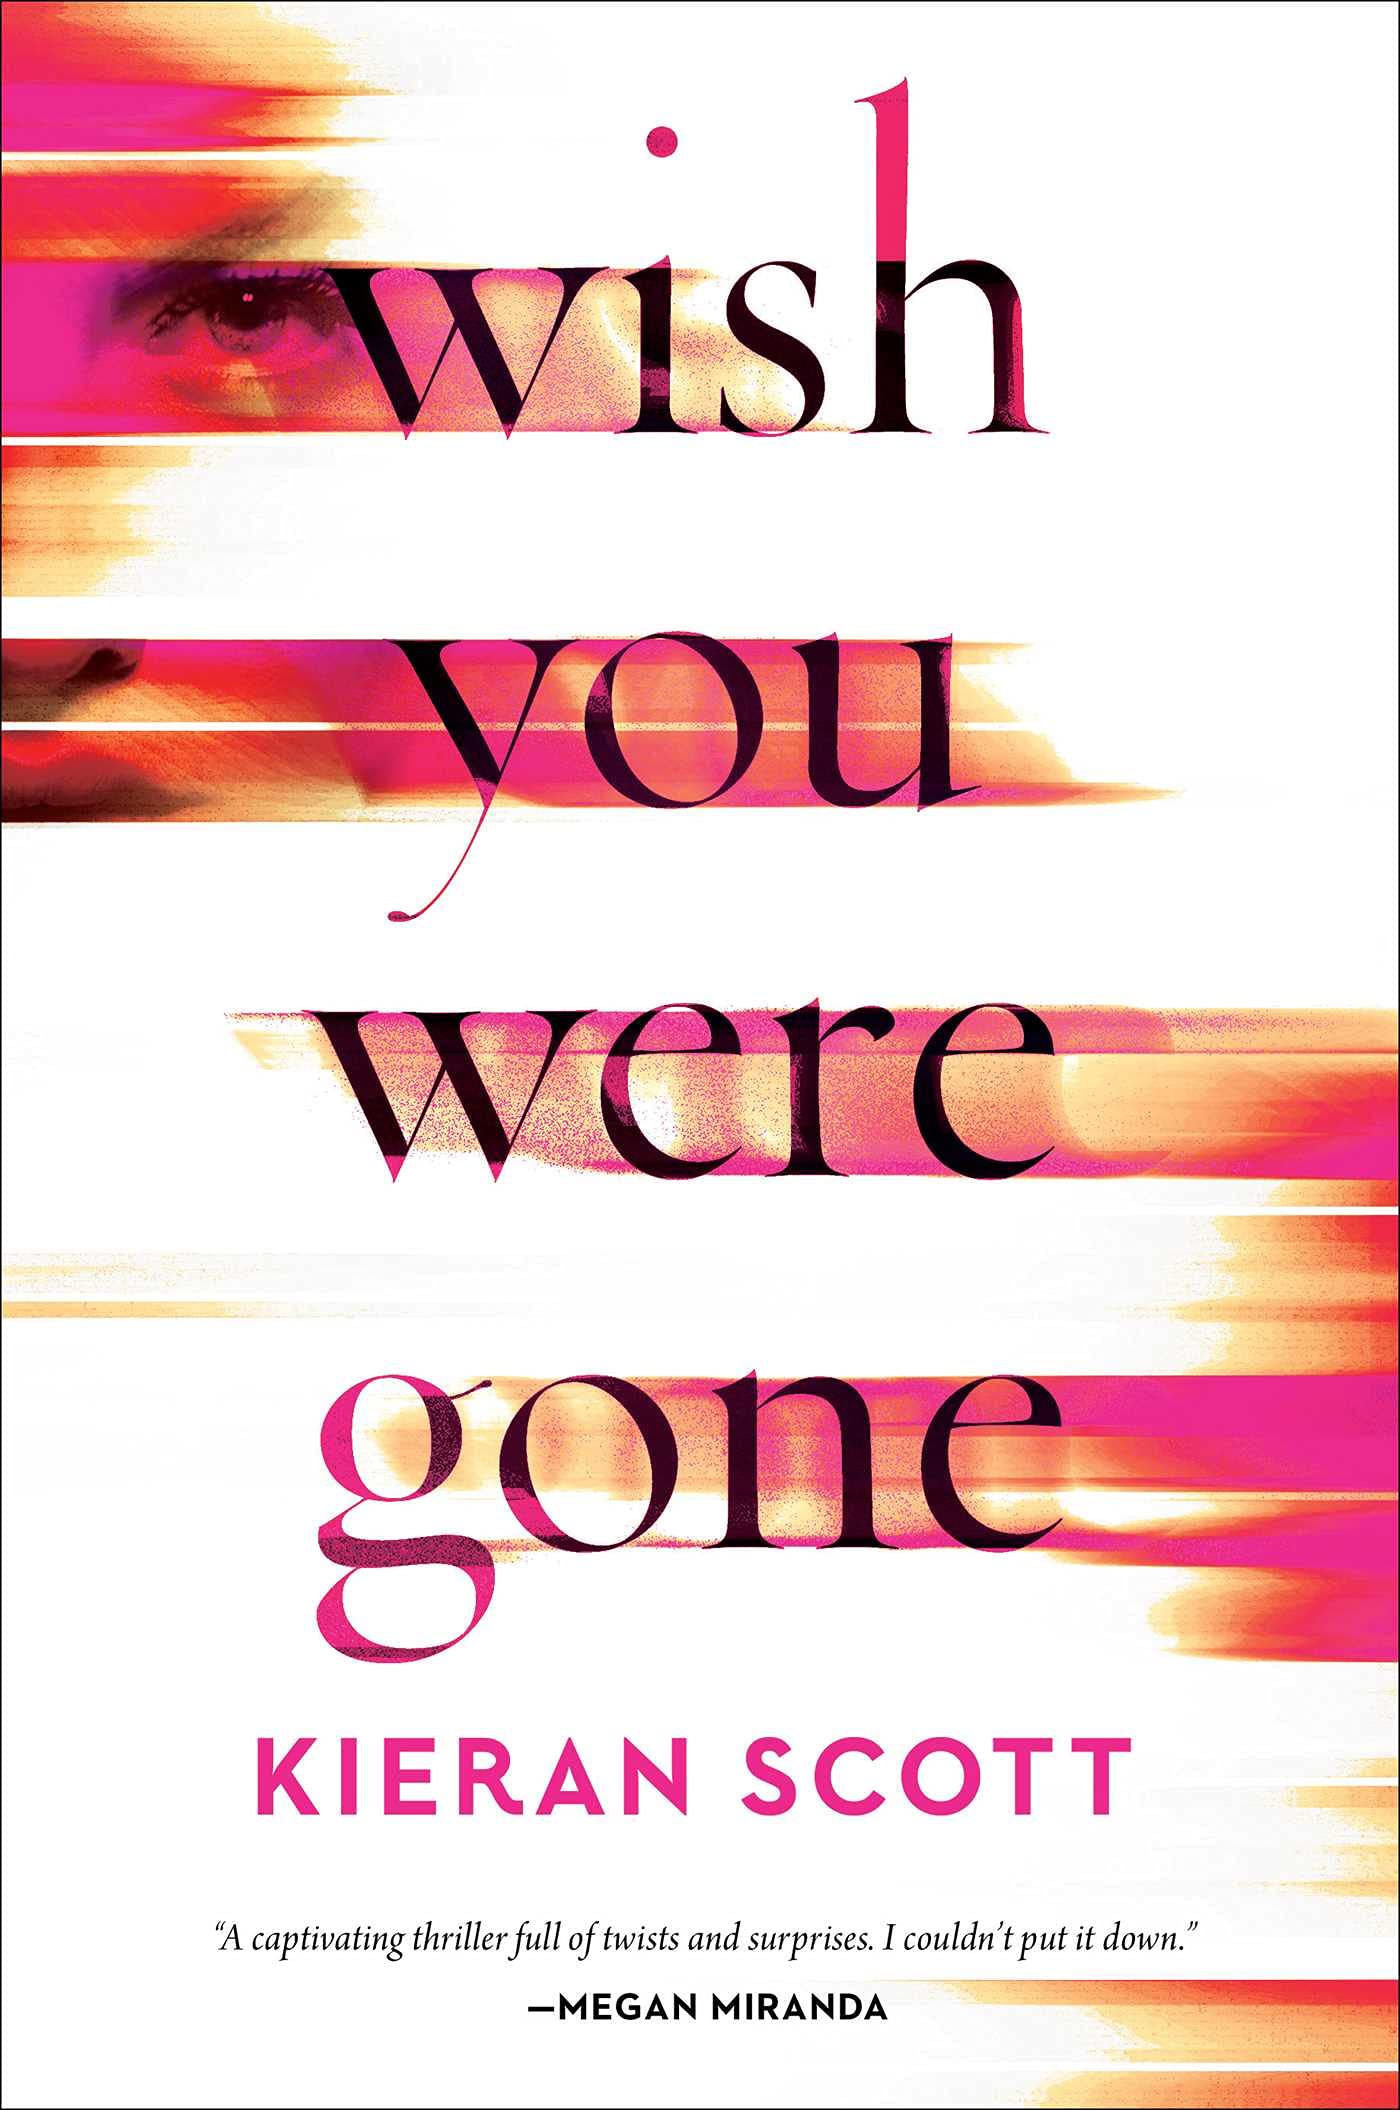 Image for "Wish You Were Gone"